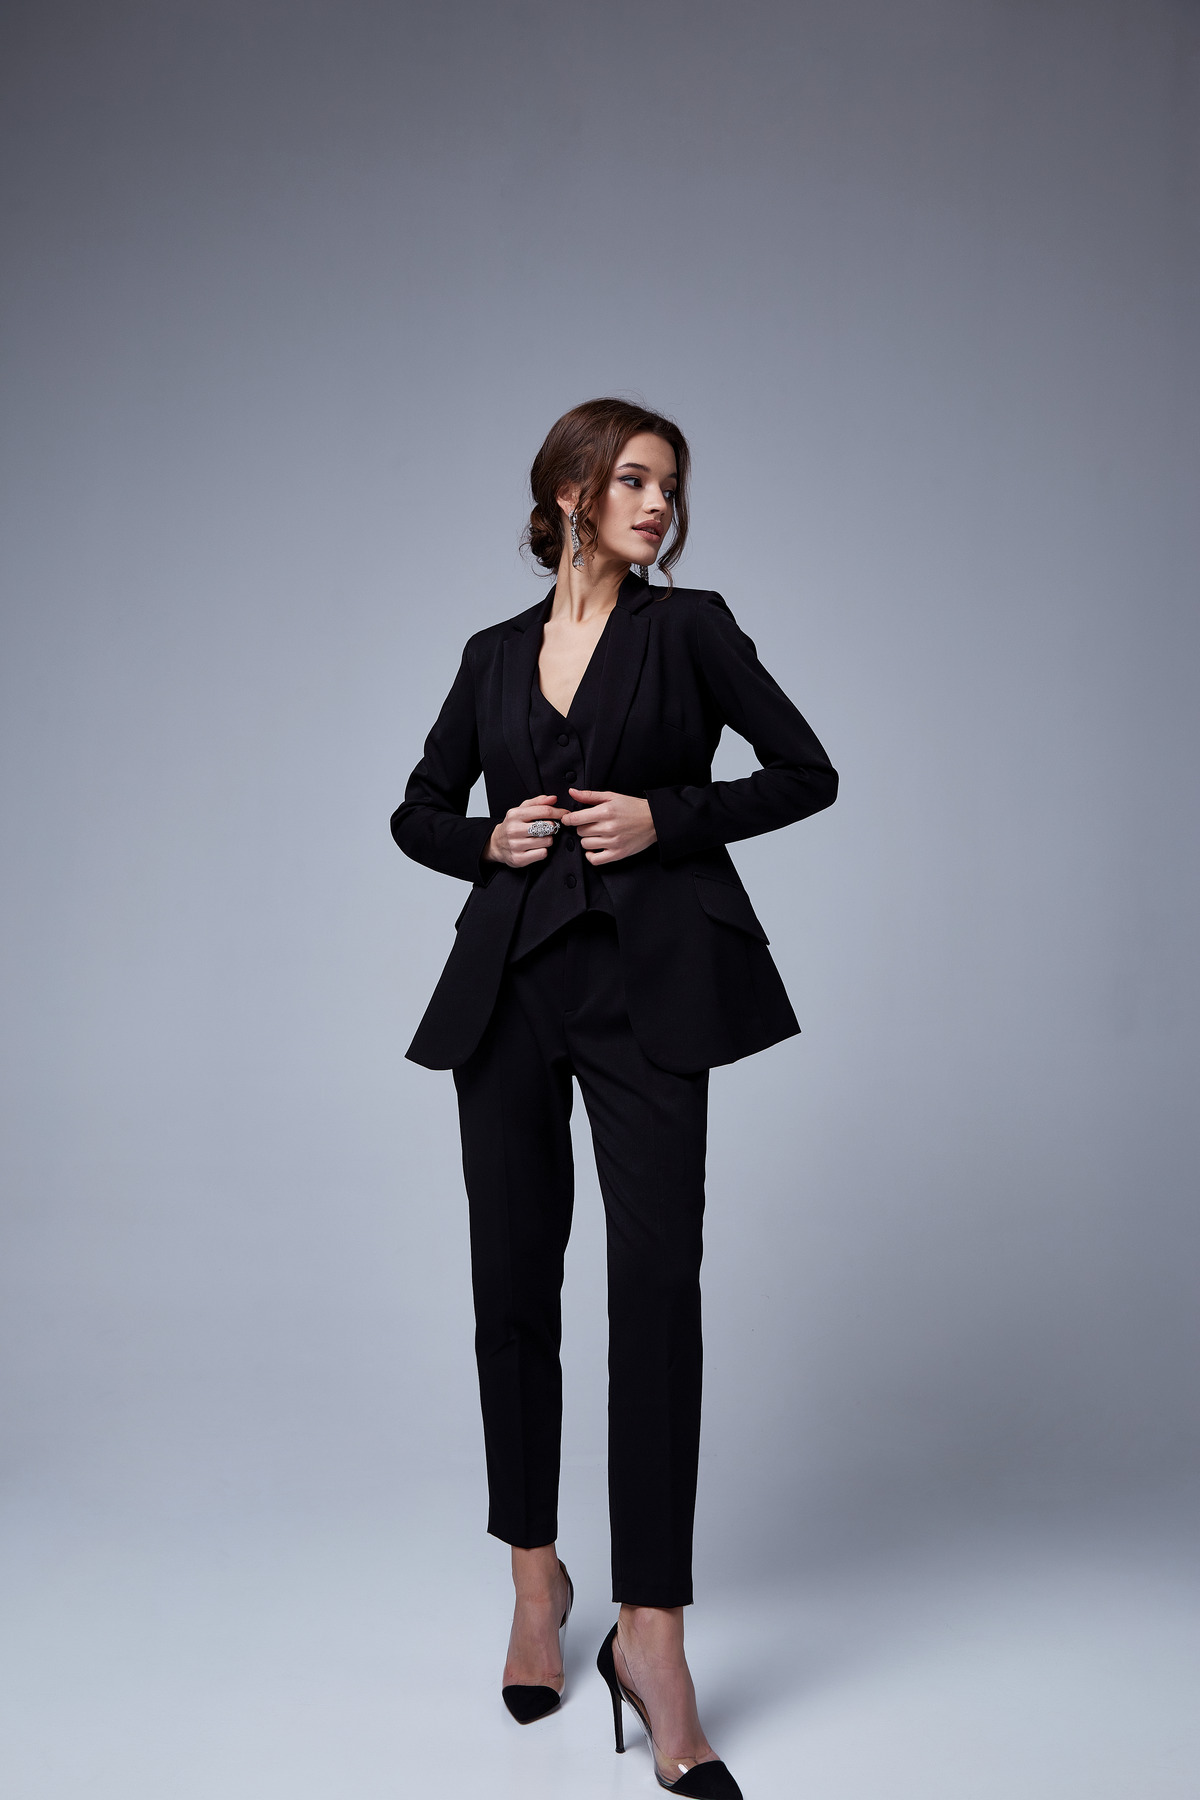 35 Funeral Outfit Ideas For Women in 2023 - Hood MWR